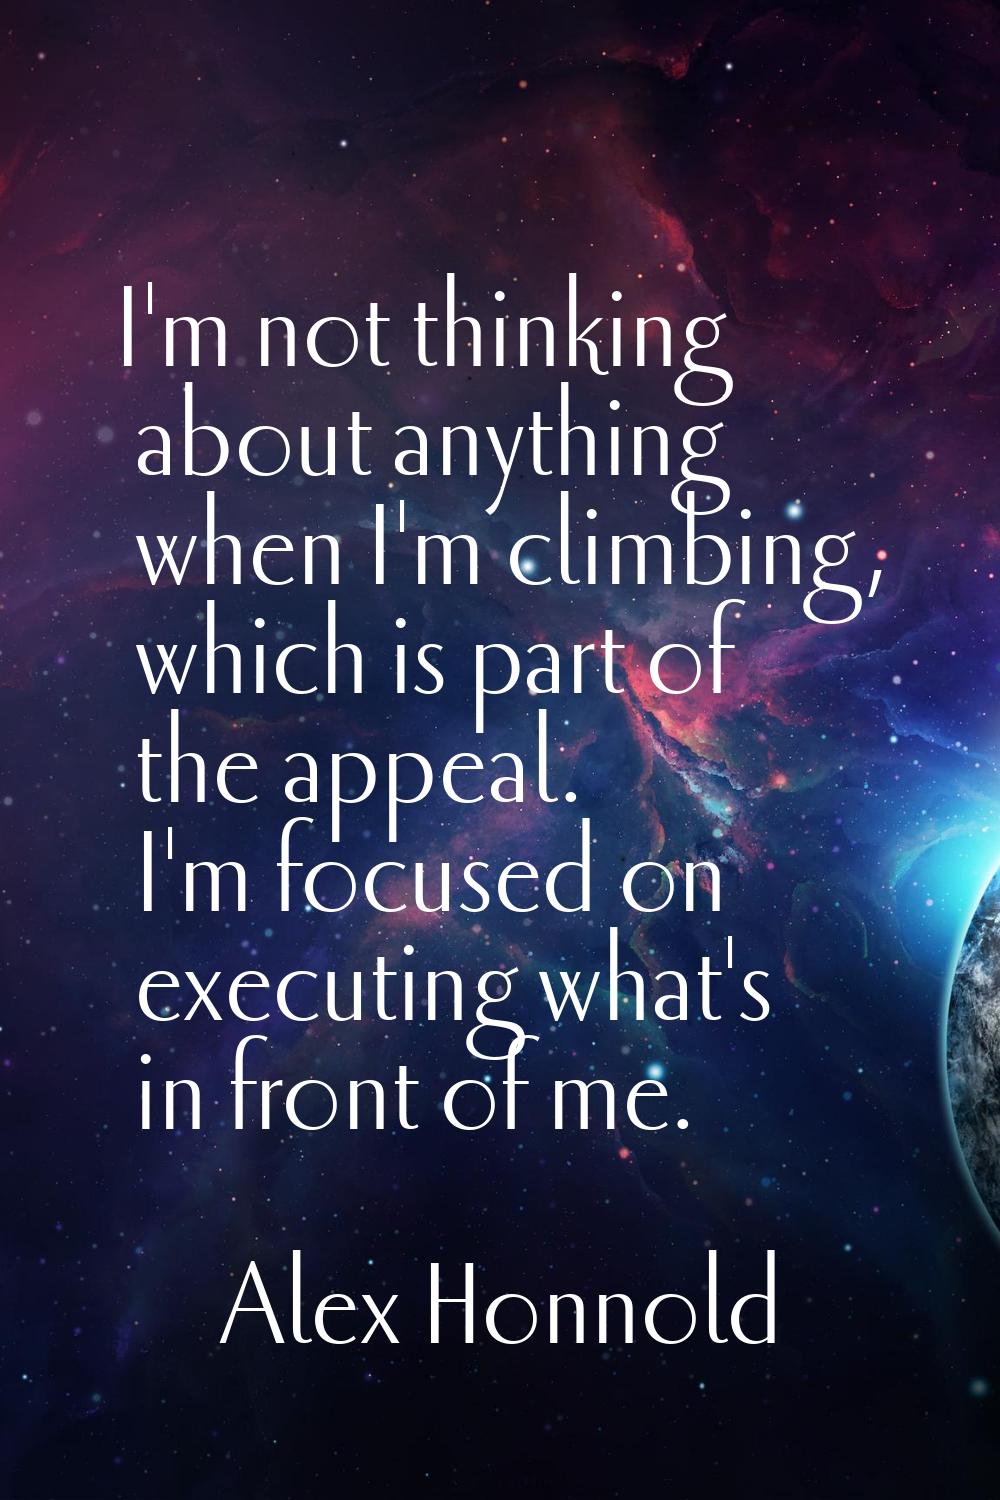 I'm not thinking about anything when I'm climbing, which is part of the appeal. I'm focused on exec